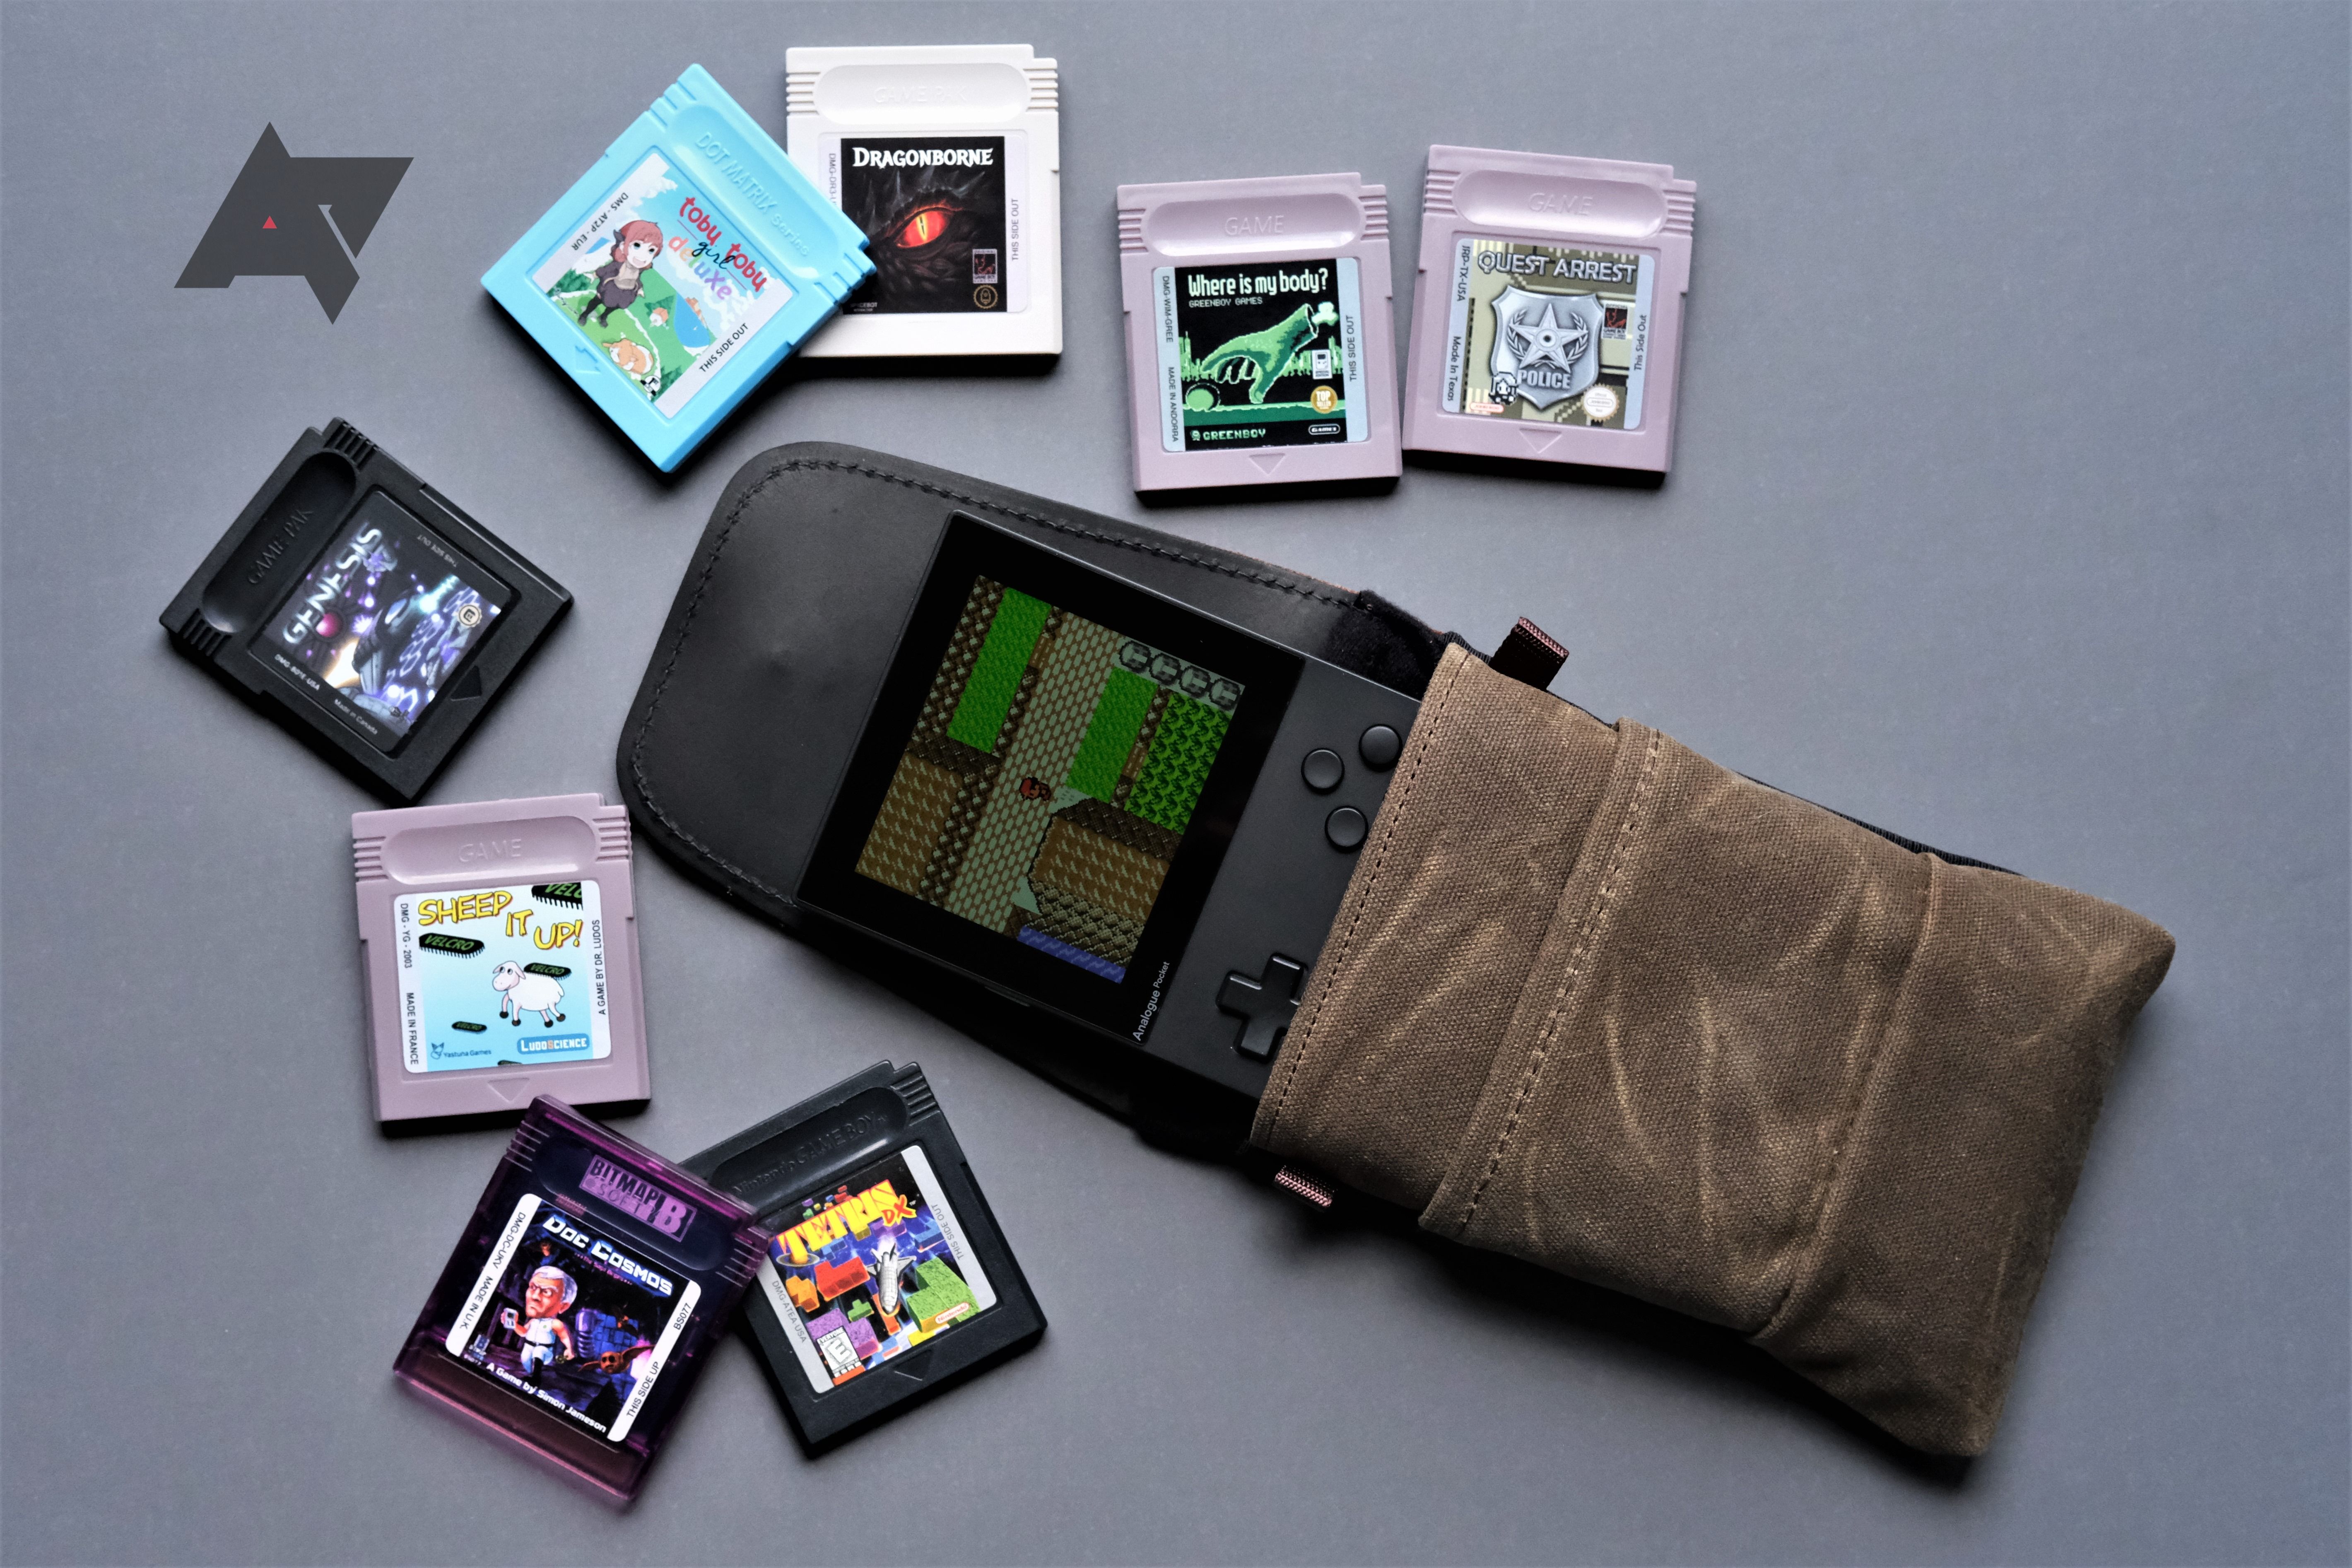 Waterfield's Analogue Pocket cases are your portable game console's secret  weapon